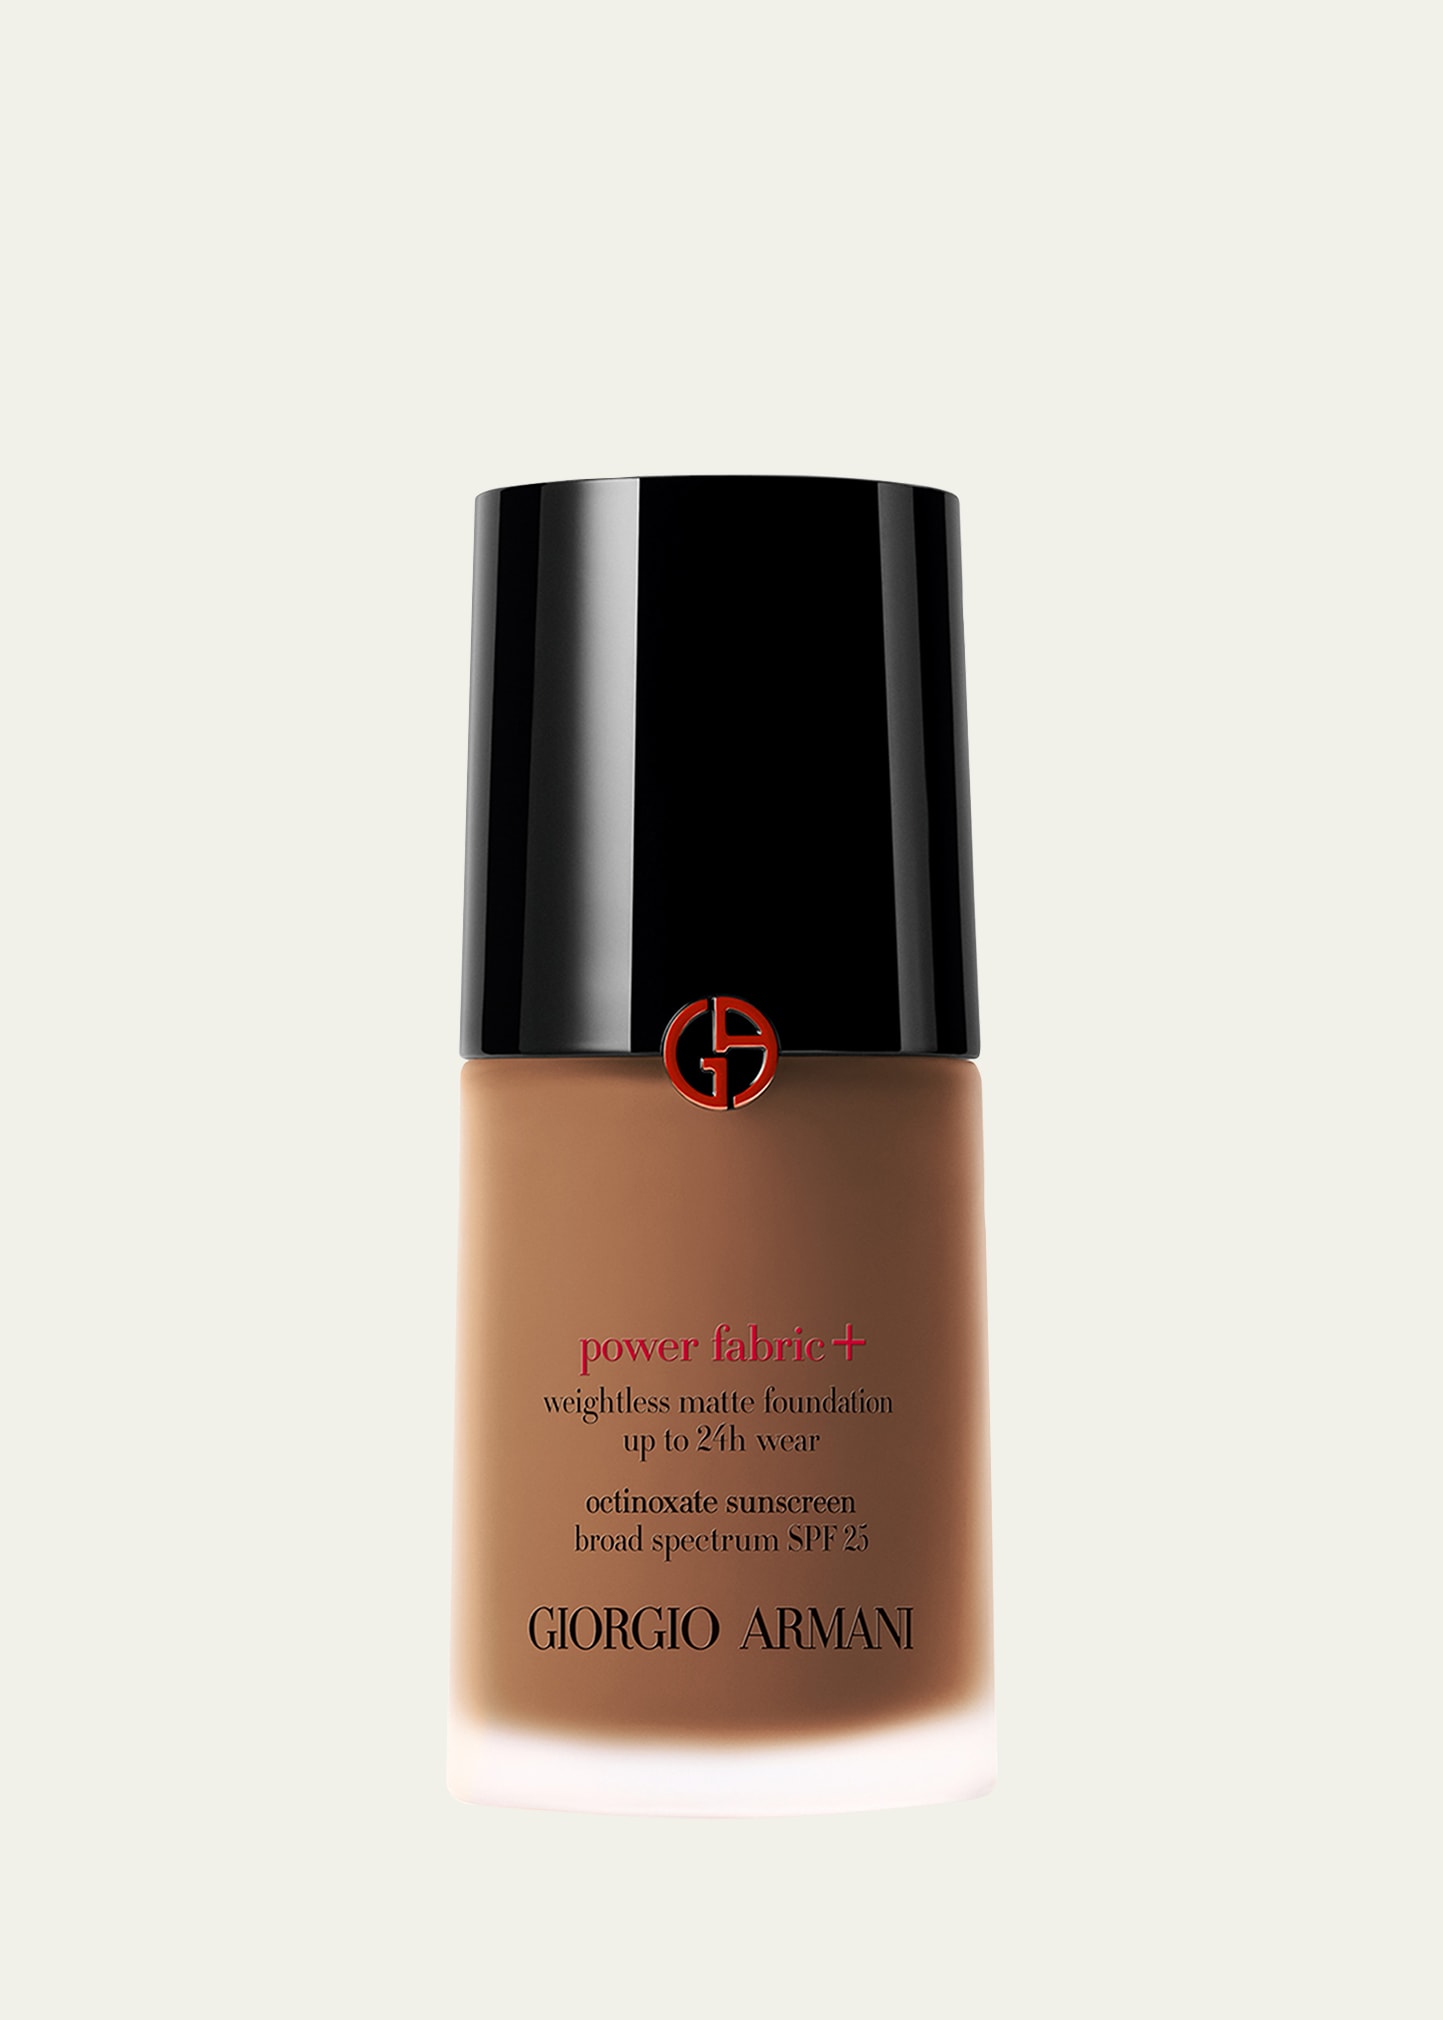 Armani Beauty Power Fabric+ Matte Foundation With Broad-spectrum Spf 25 In 11